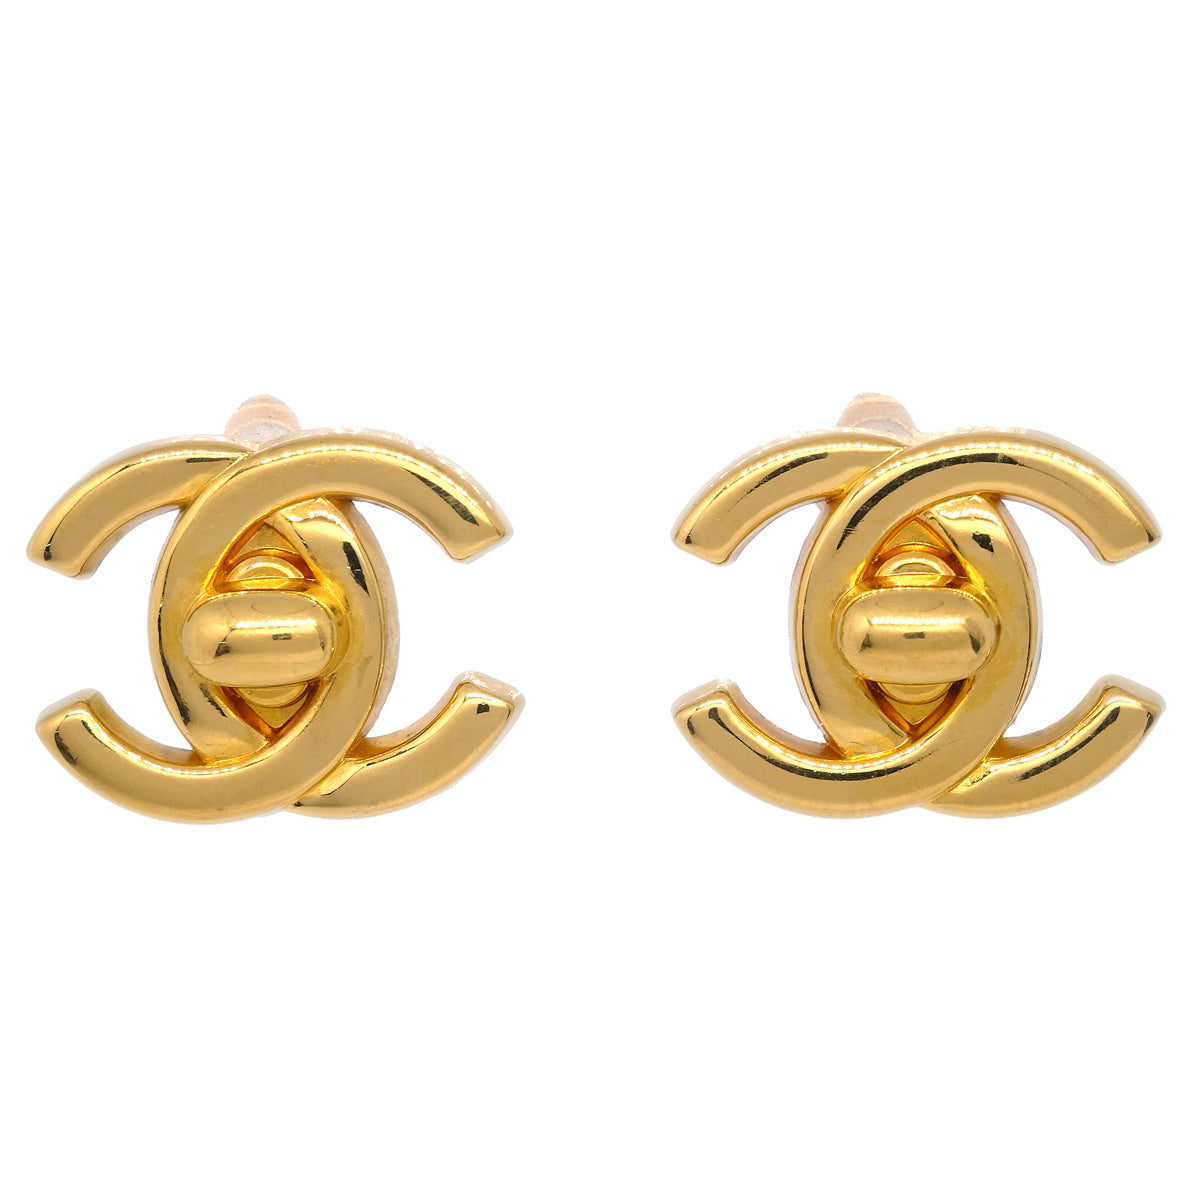 Chanel CC Turnlock Earrings Clip-On Gold Small 97P